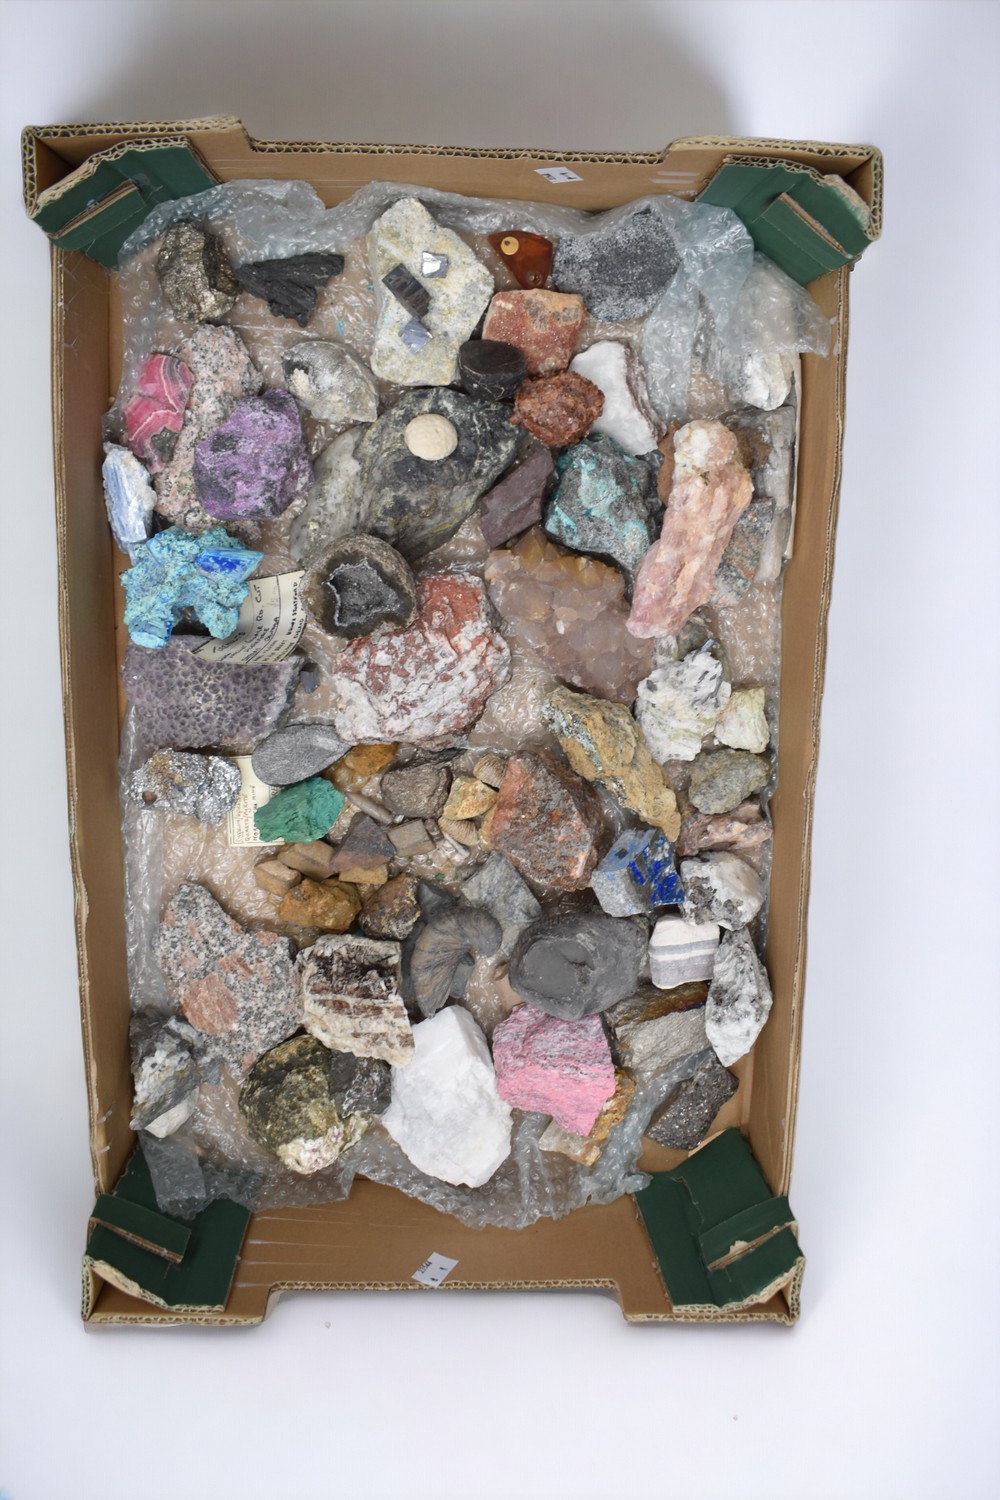 A collection of various rocks and minerals including ammonite, rhodochrosite, druzy, kyanite,